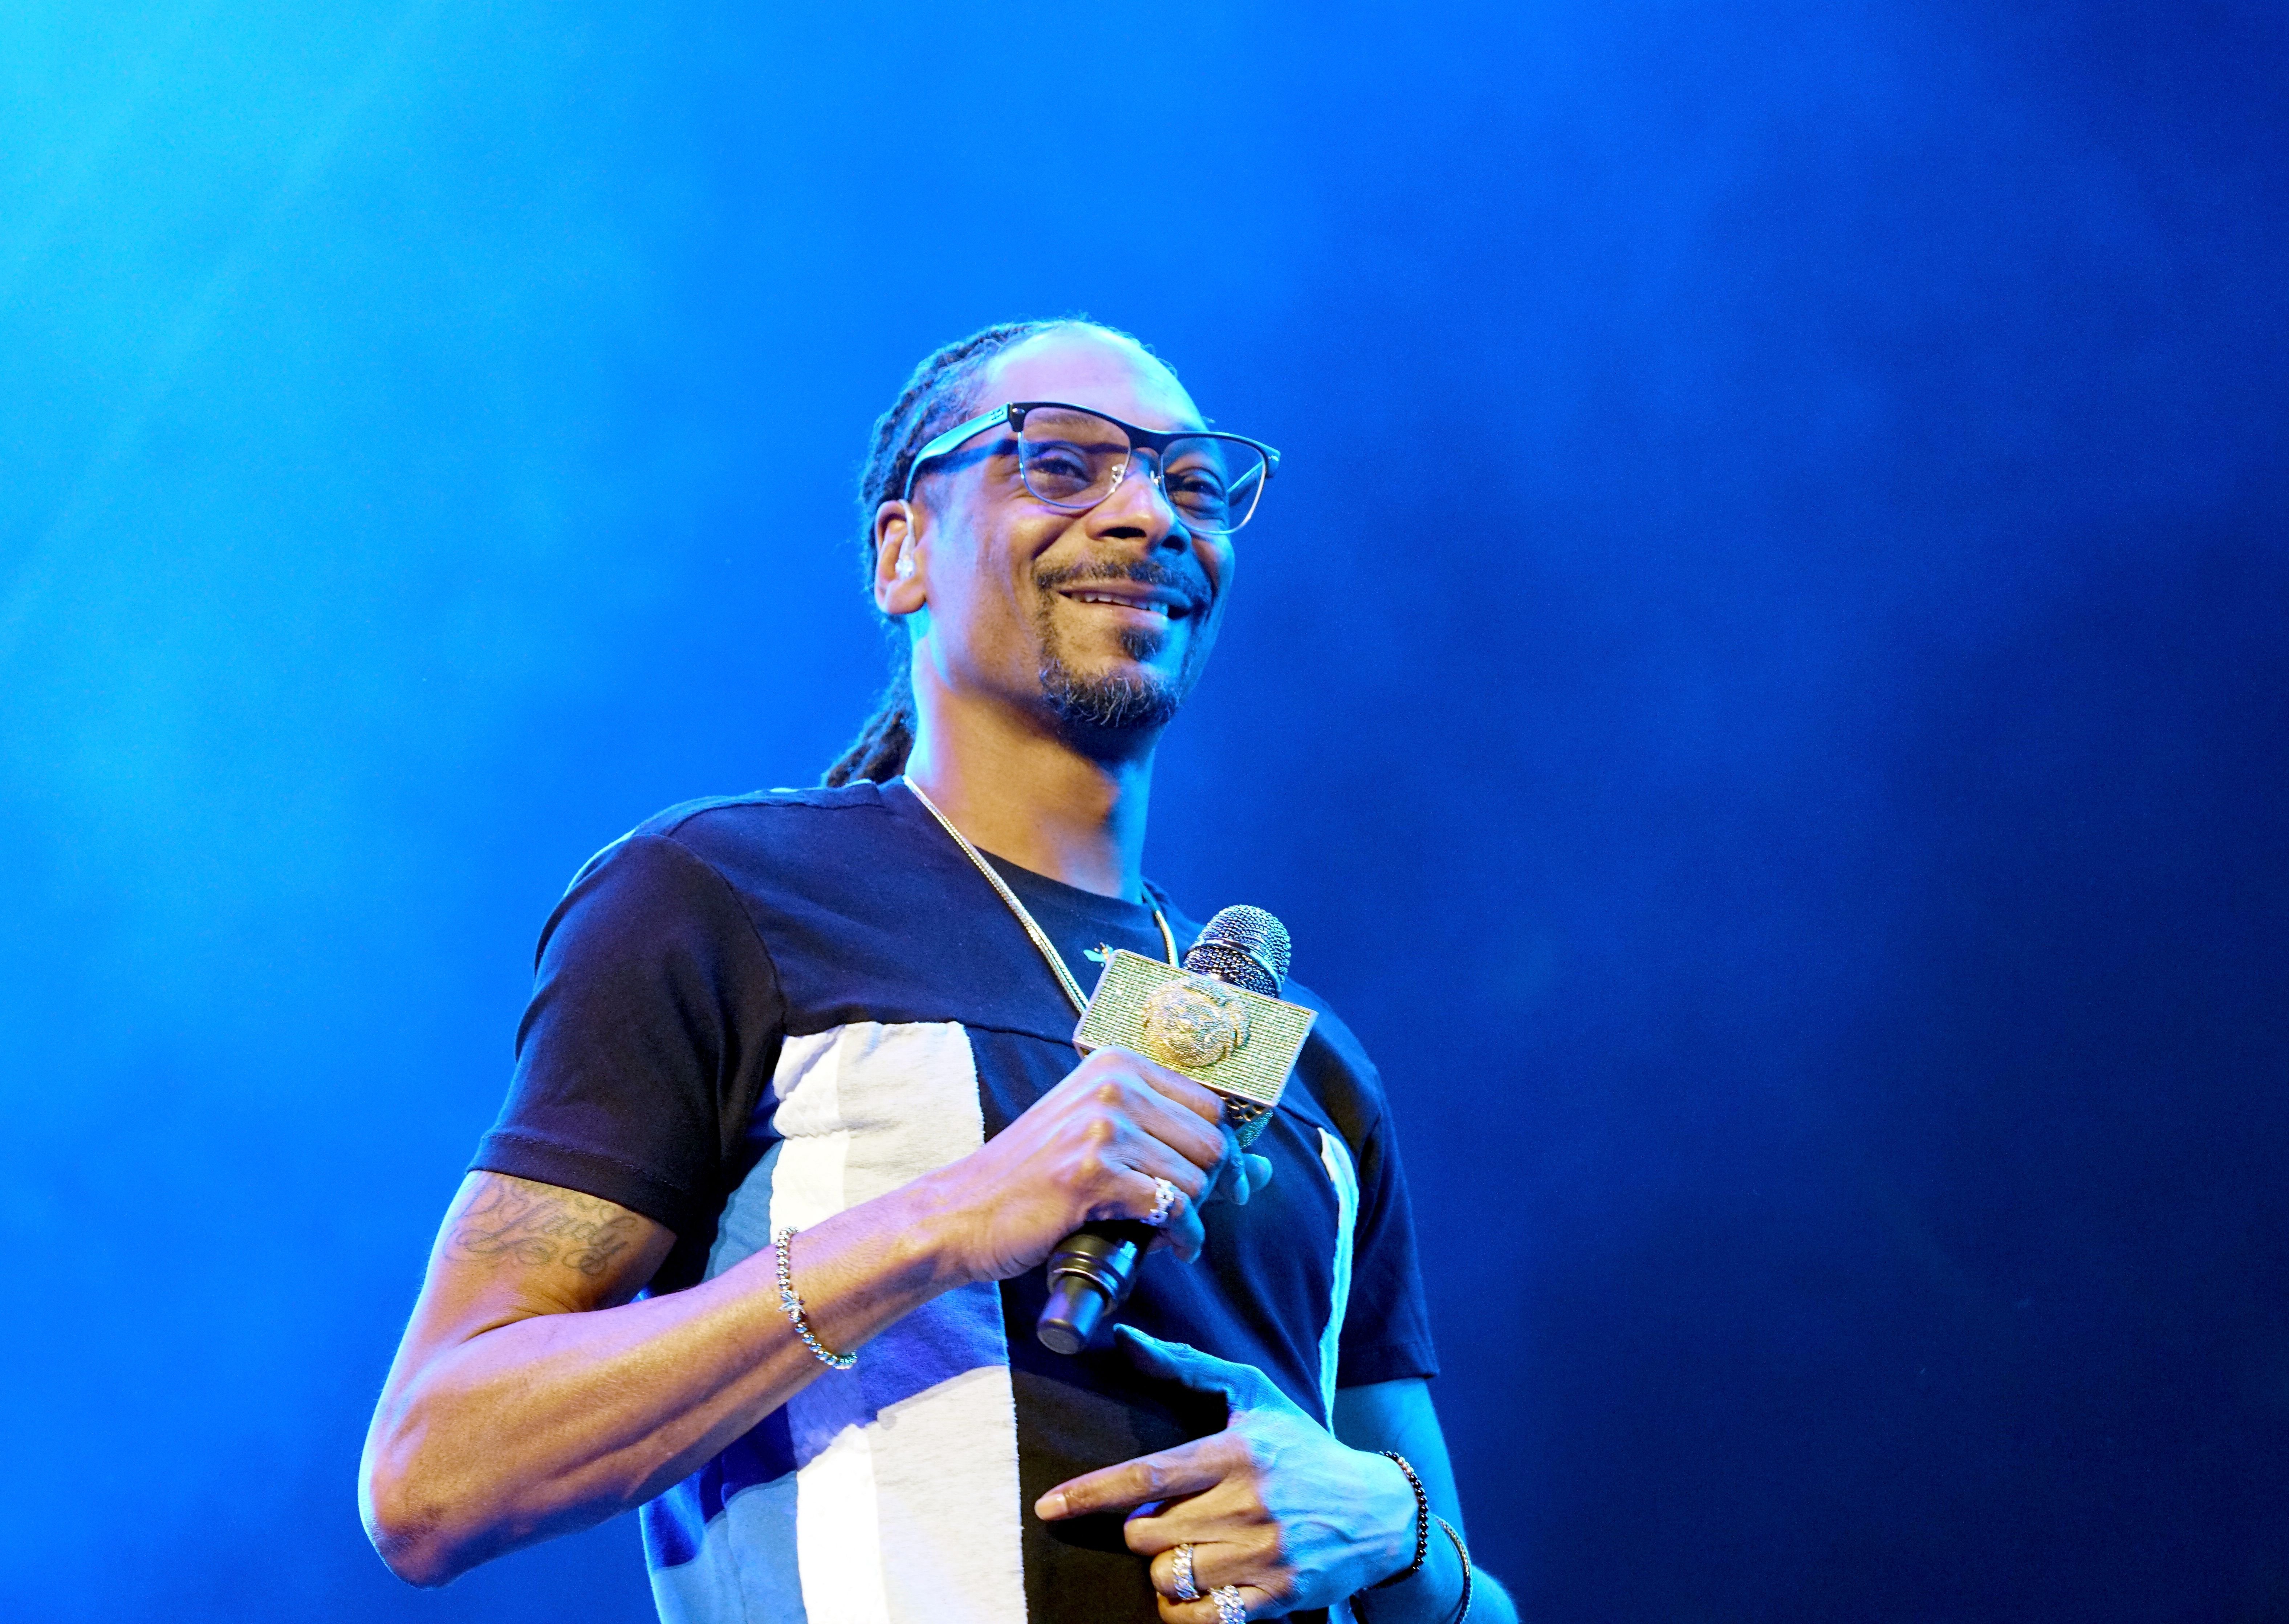 Snoop Dogg during the 2017 BET Experience Staples Center Concert, sponsored by Hulu, at Staples Center on June 22, 2017 in Los Angeles, California. | Source: Getty Images